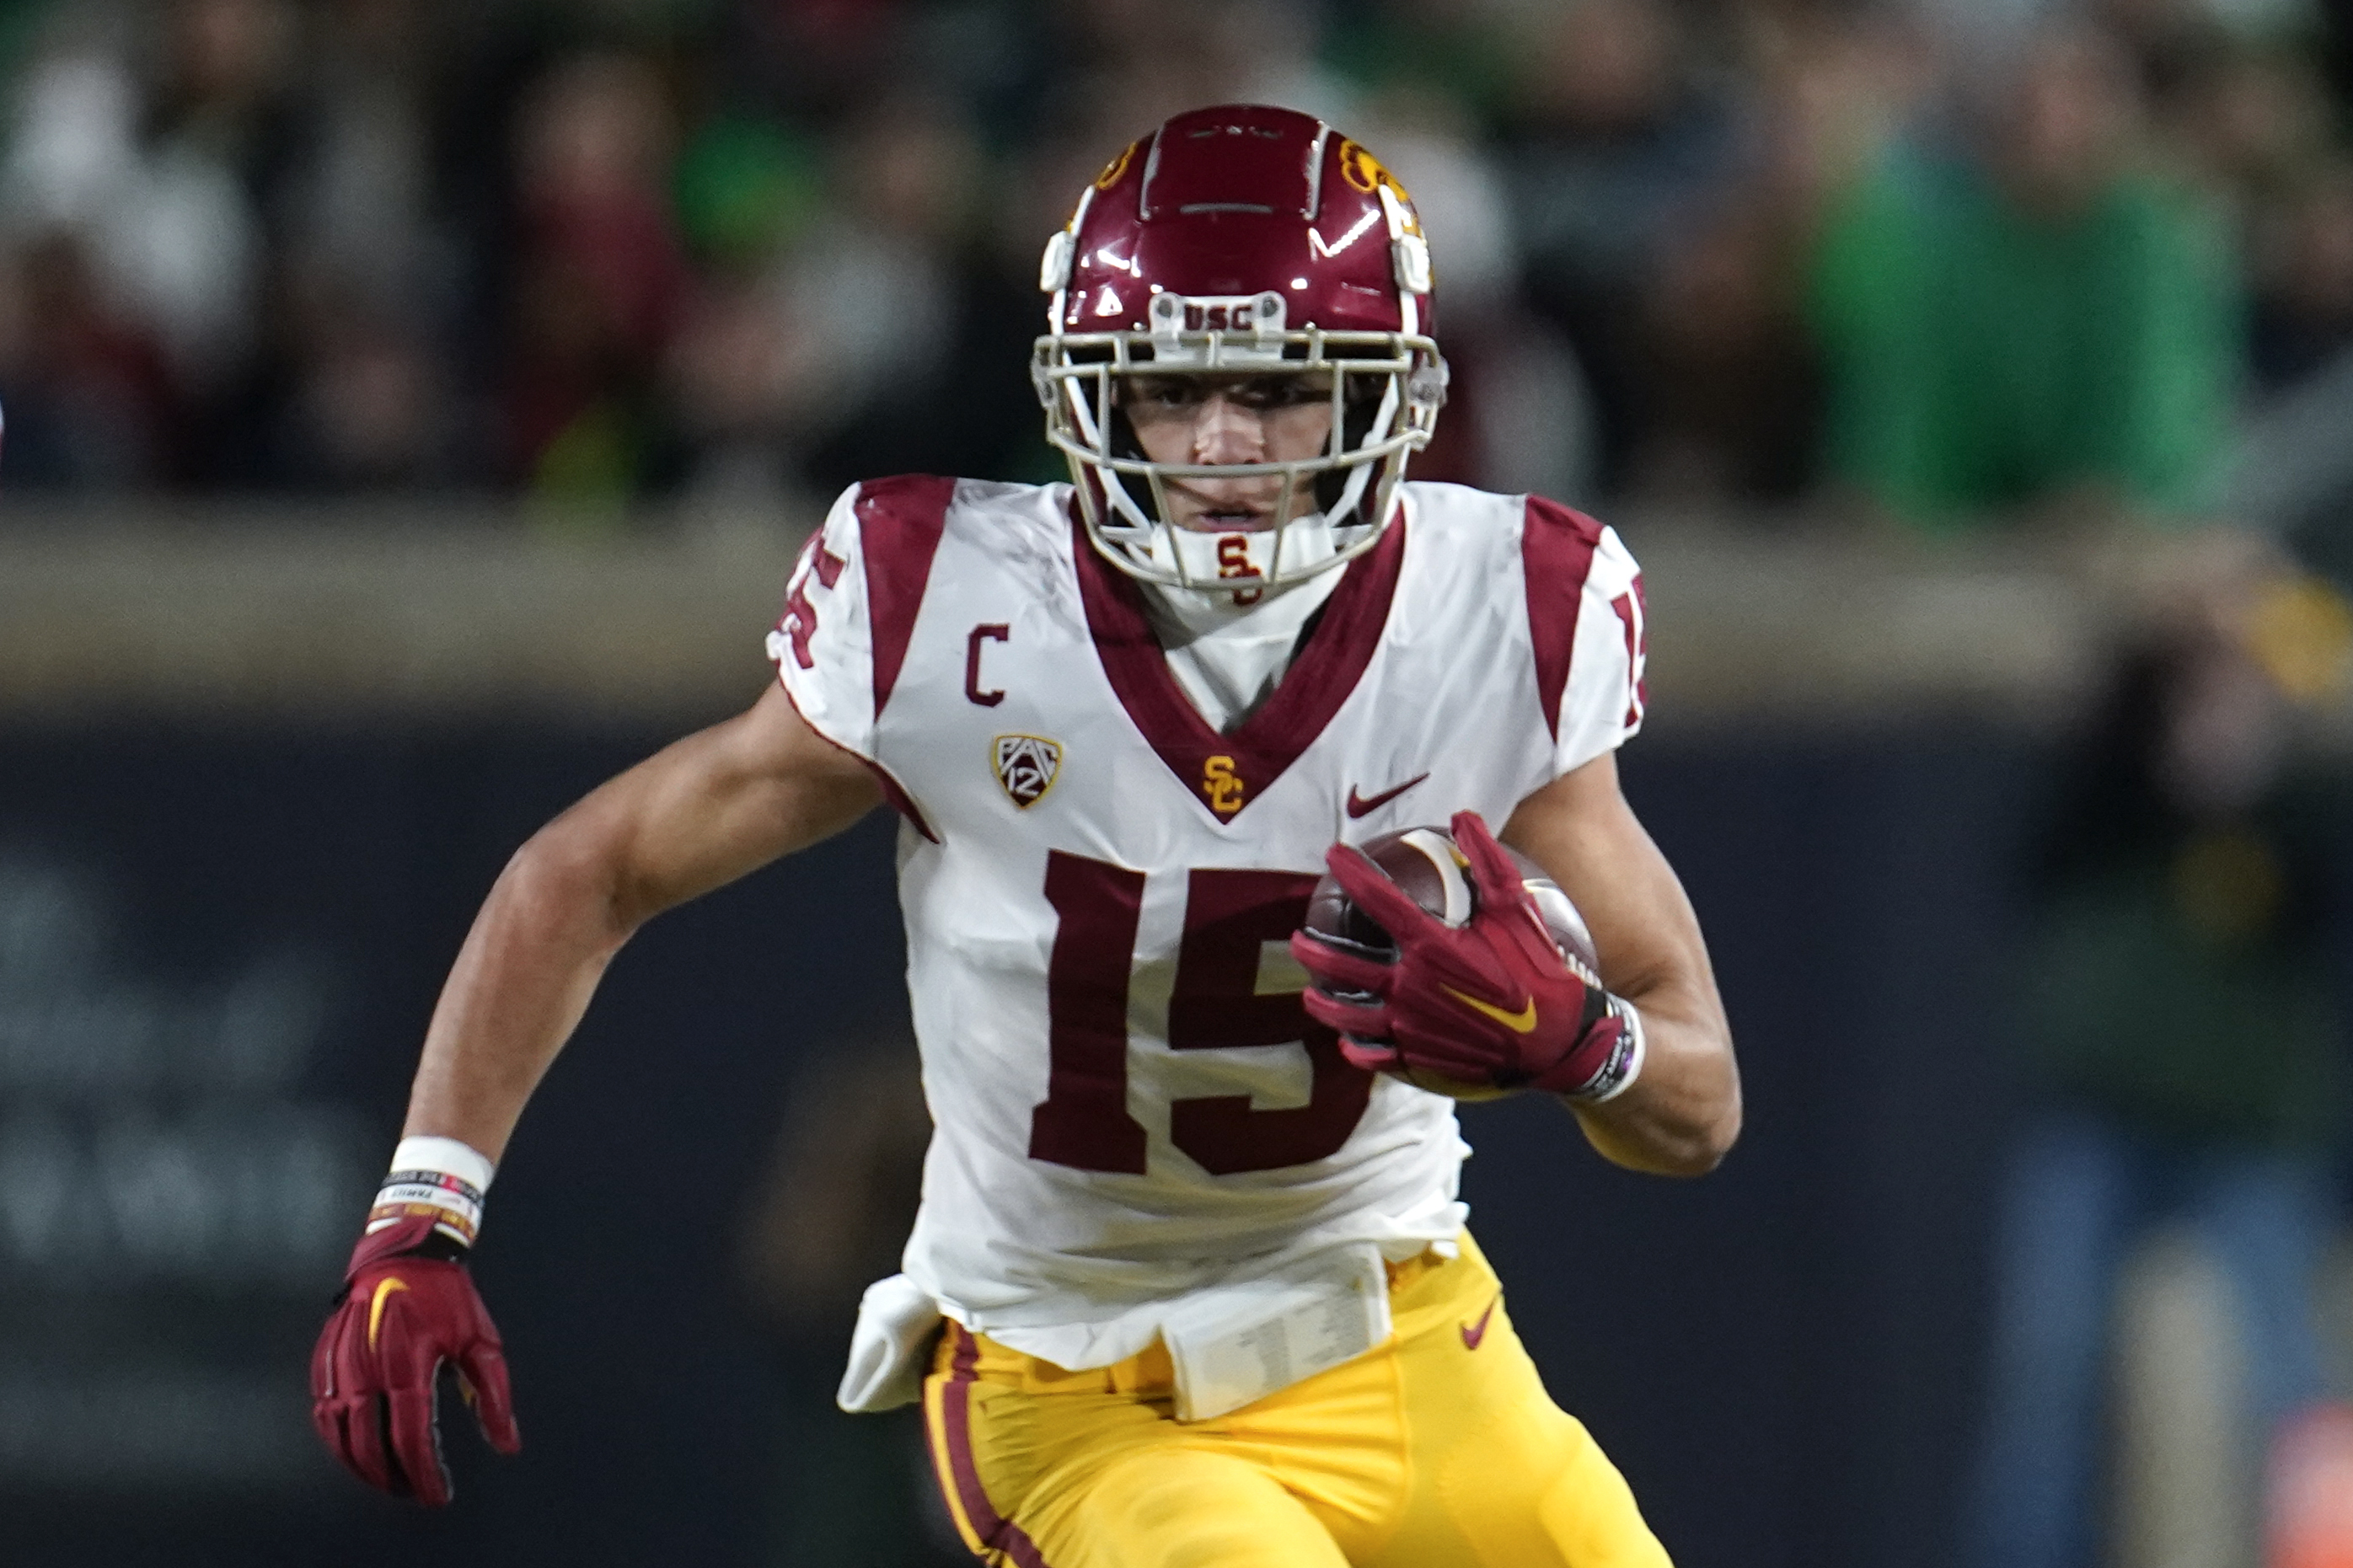 NFL draft fantasy football projections: Drake London leads crop of WRs